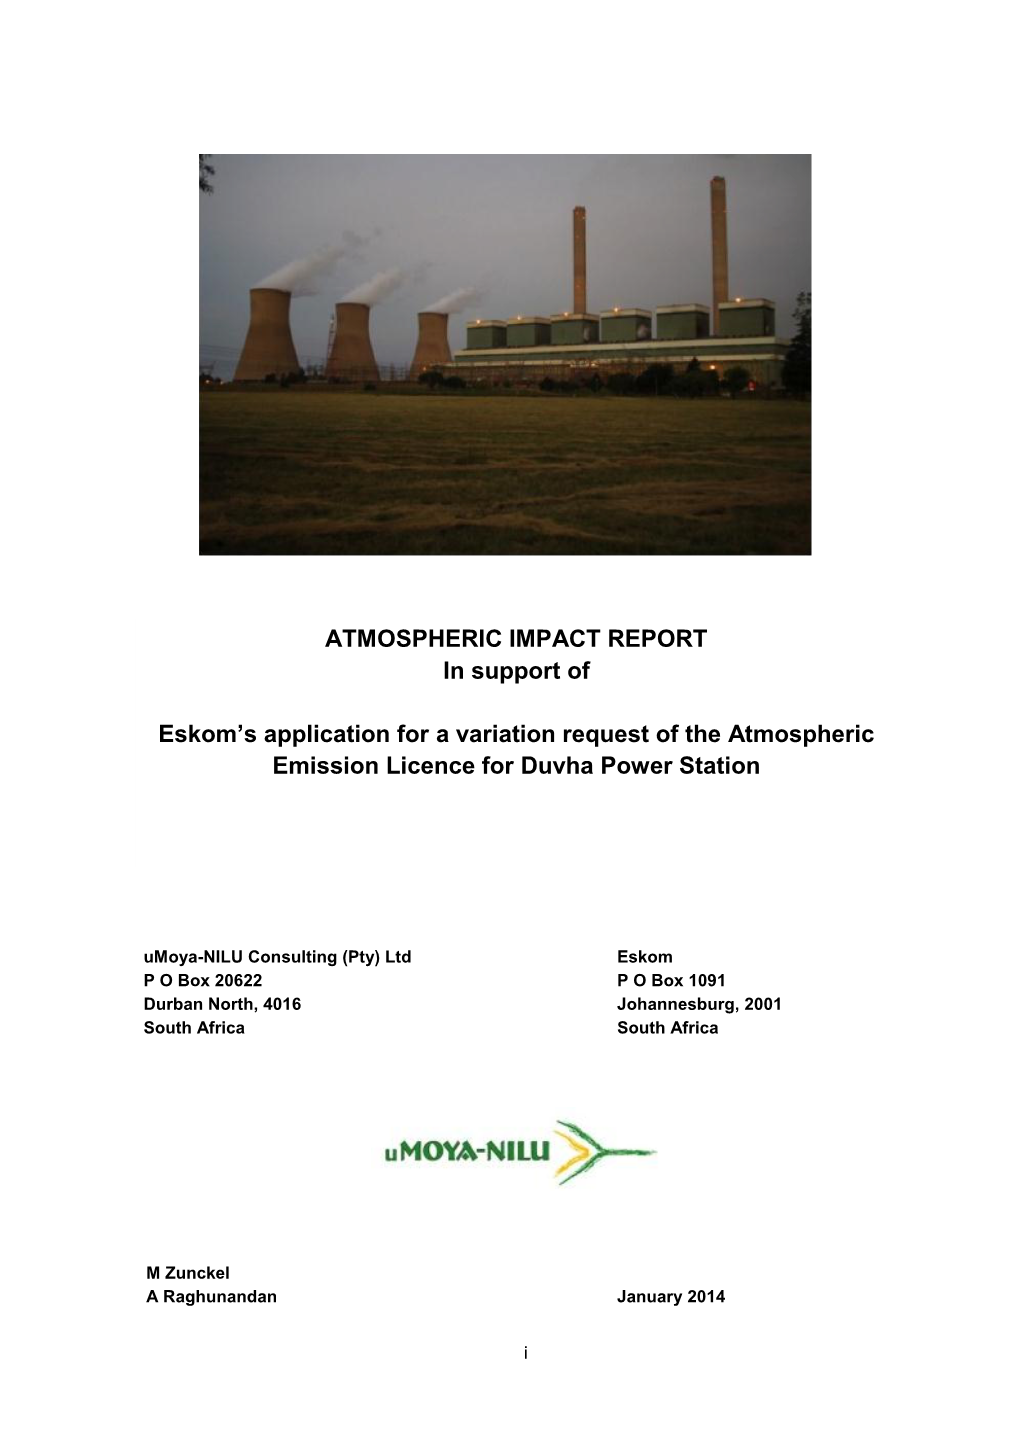 ATMOSPHERIC IMPACT REPORT in Support of Eskom's Application for a Variation Request of the Atmospheric Emission Licence